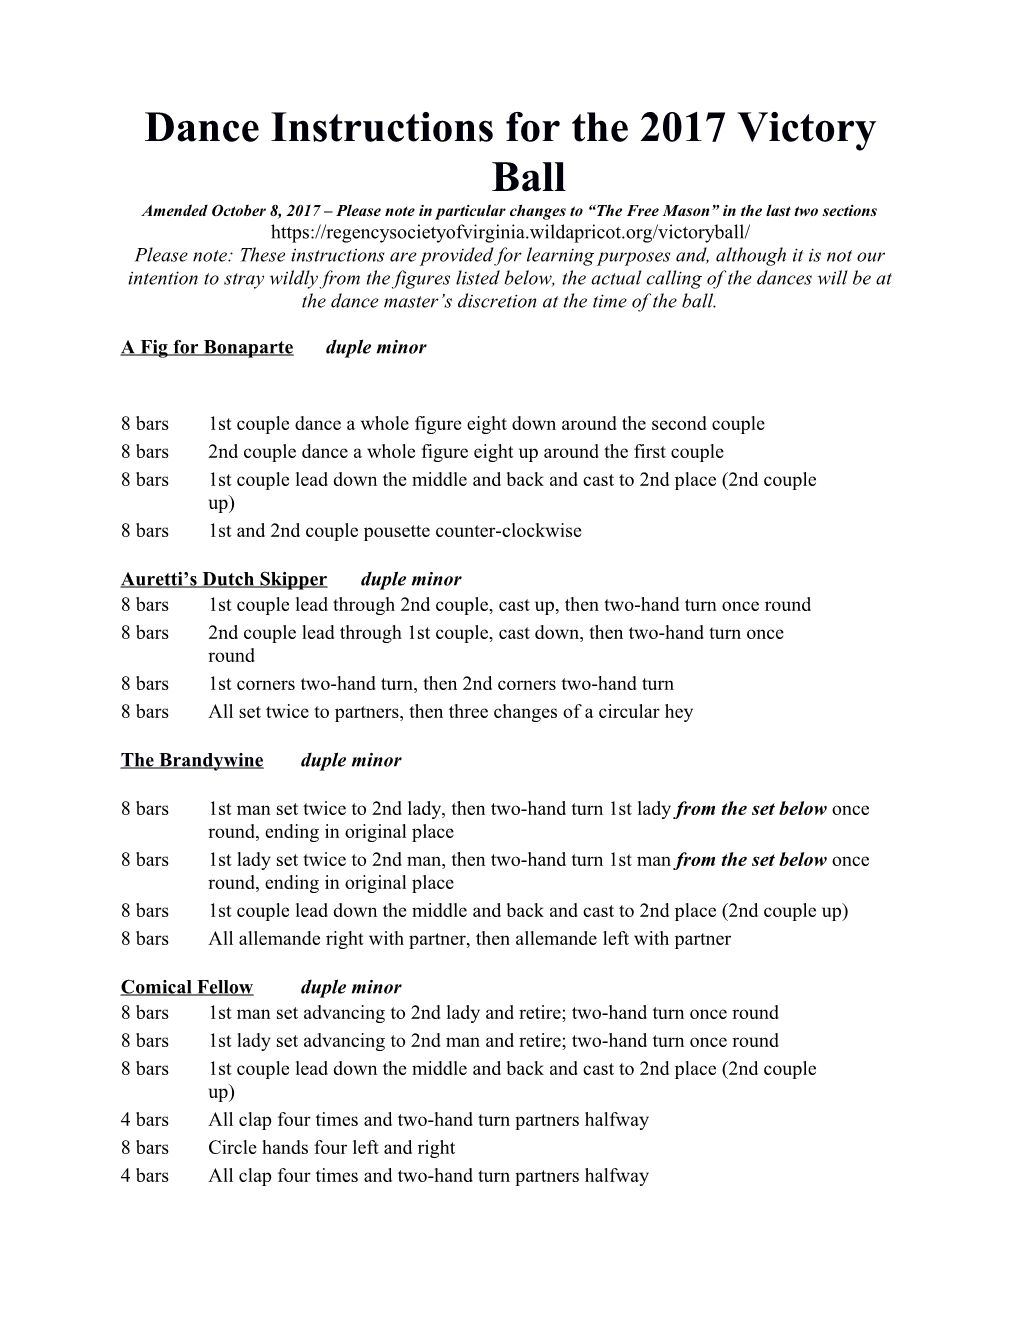 Dance Instructions for the 2017 Victory Ball